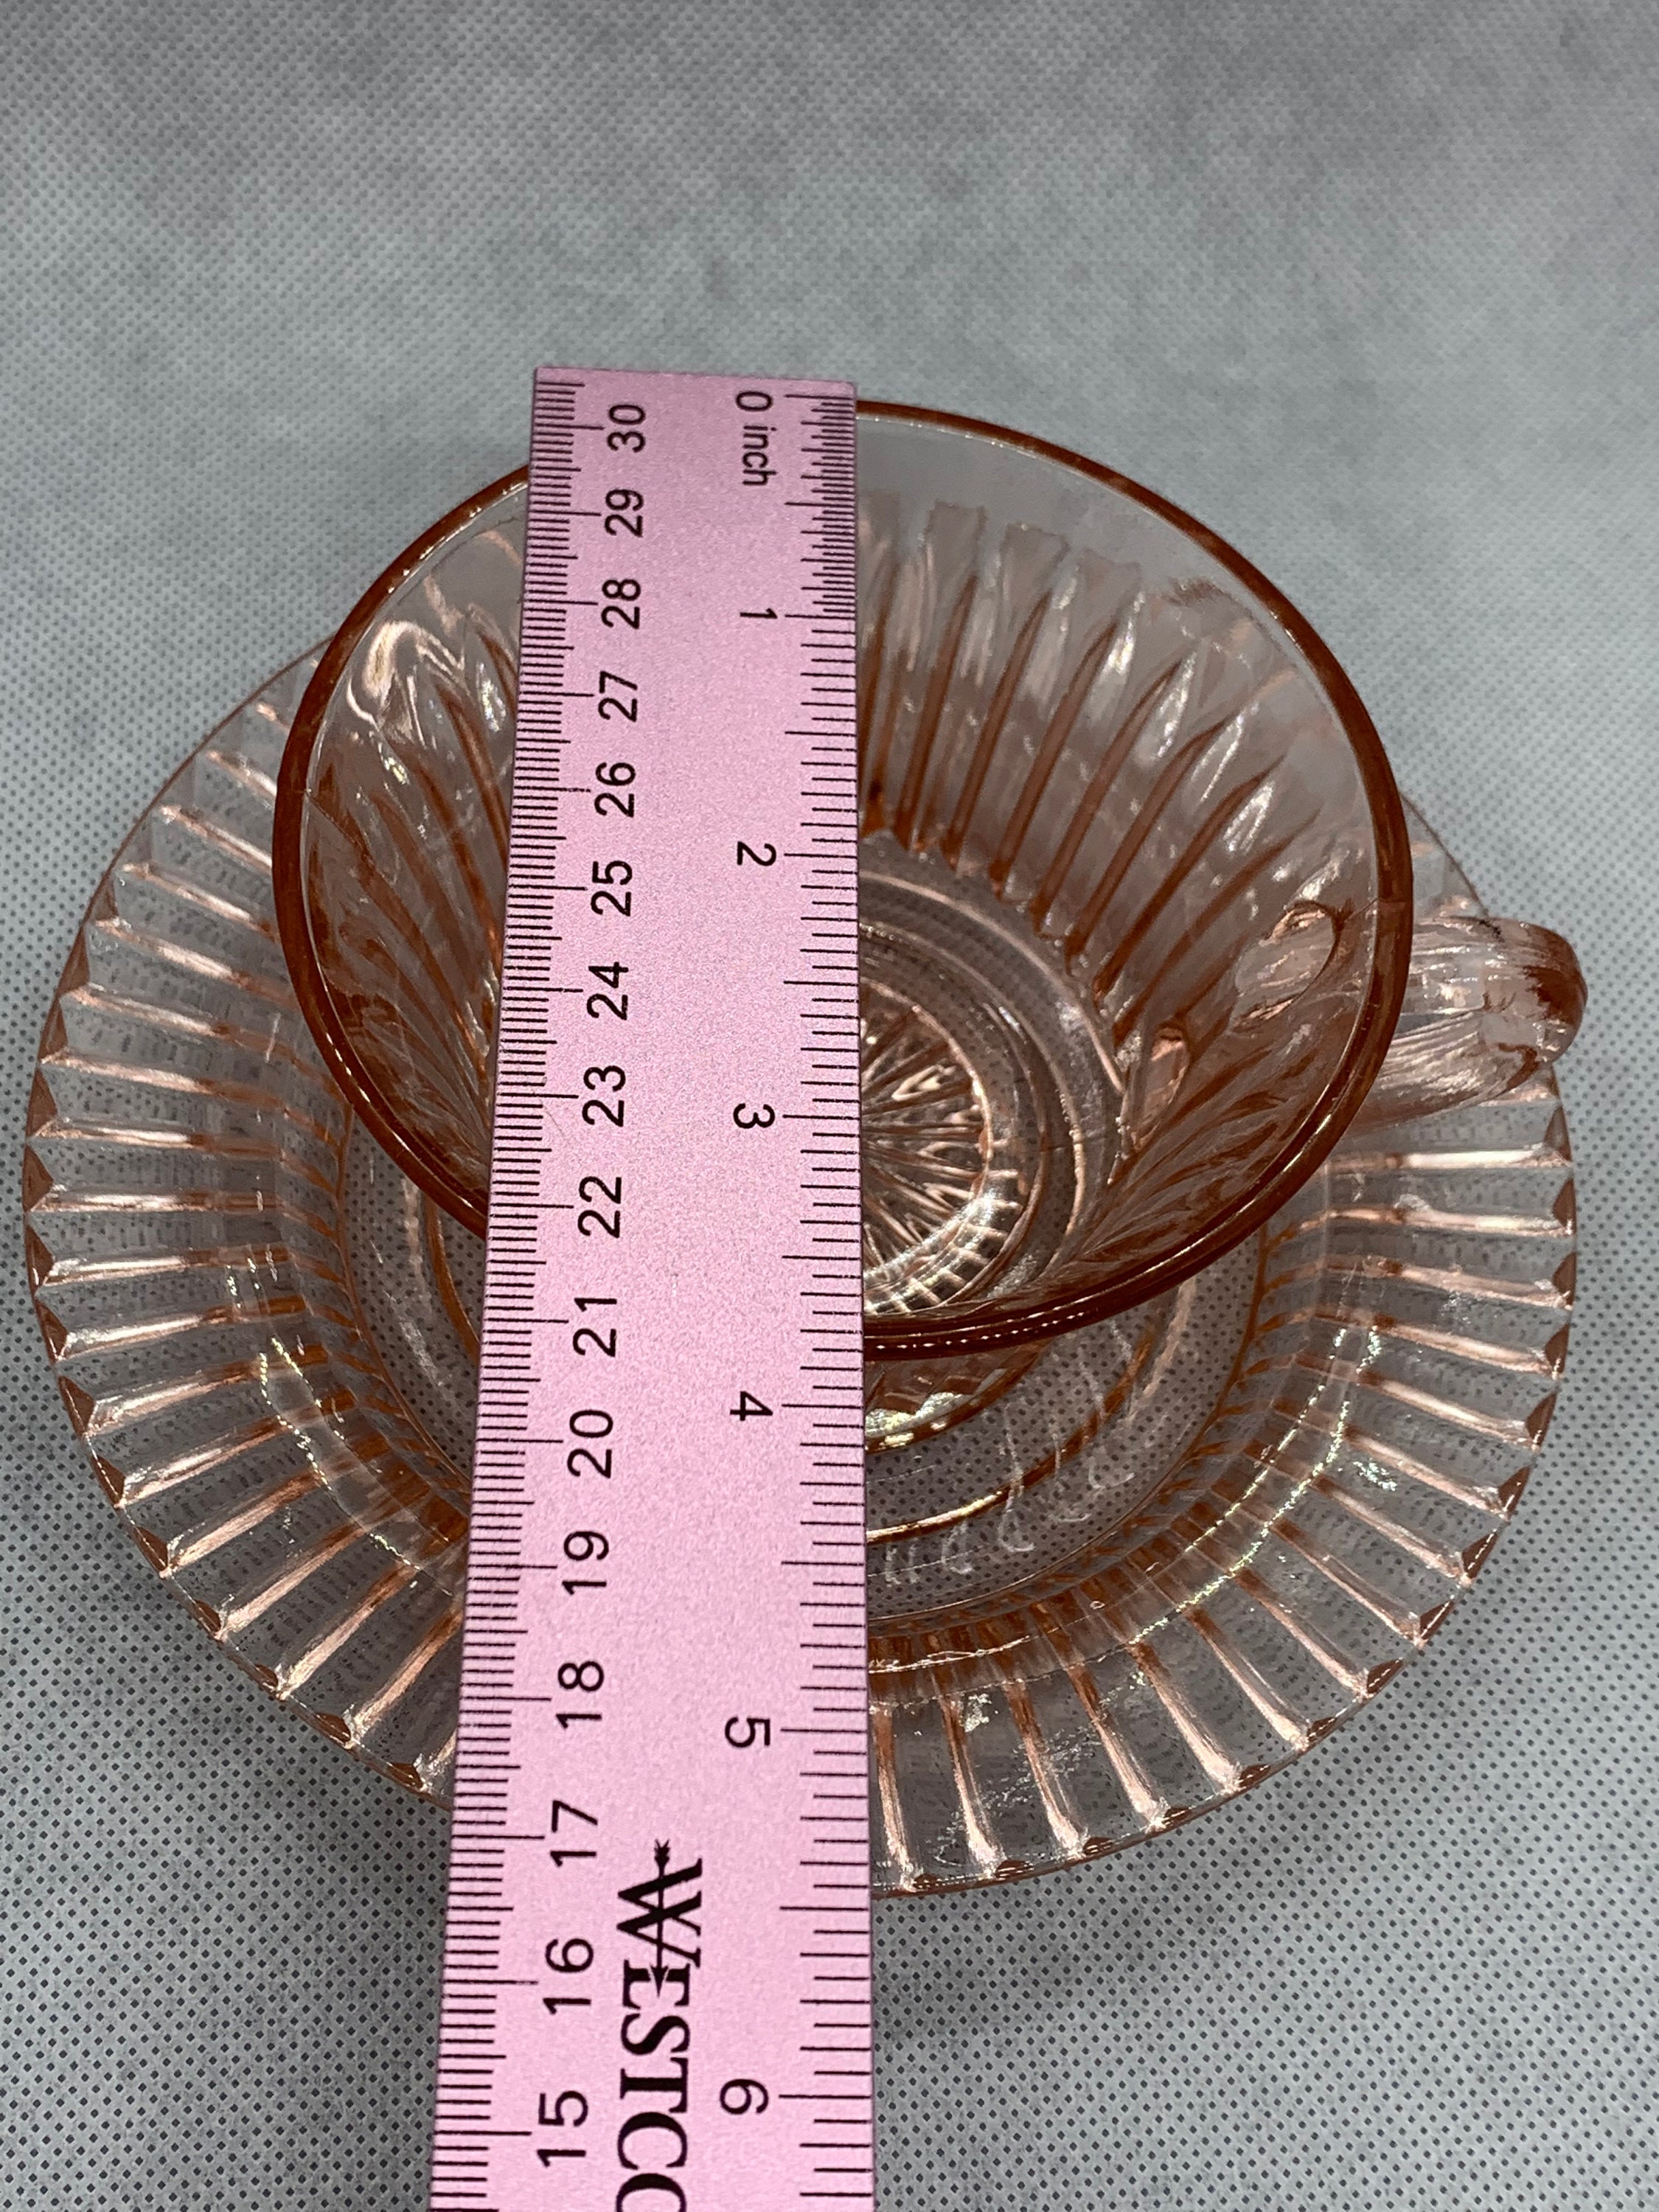 Queen Mary Depression Glass Anchor Hocking Pink Cup and Saucer Set, Pointed  Handle Cup - Etsy